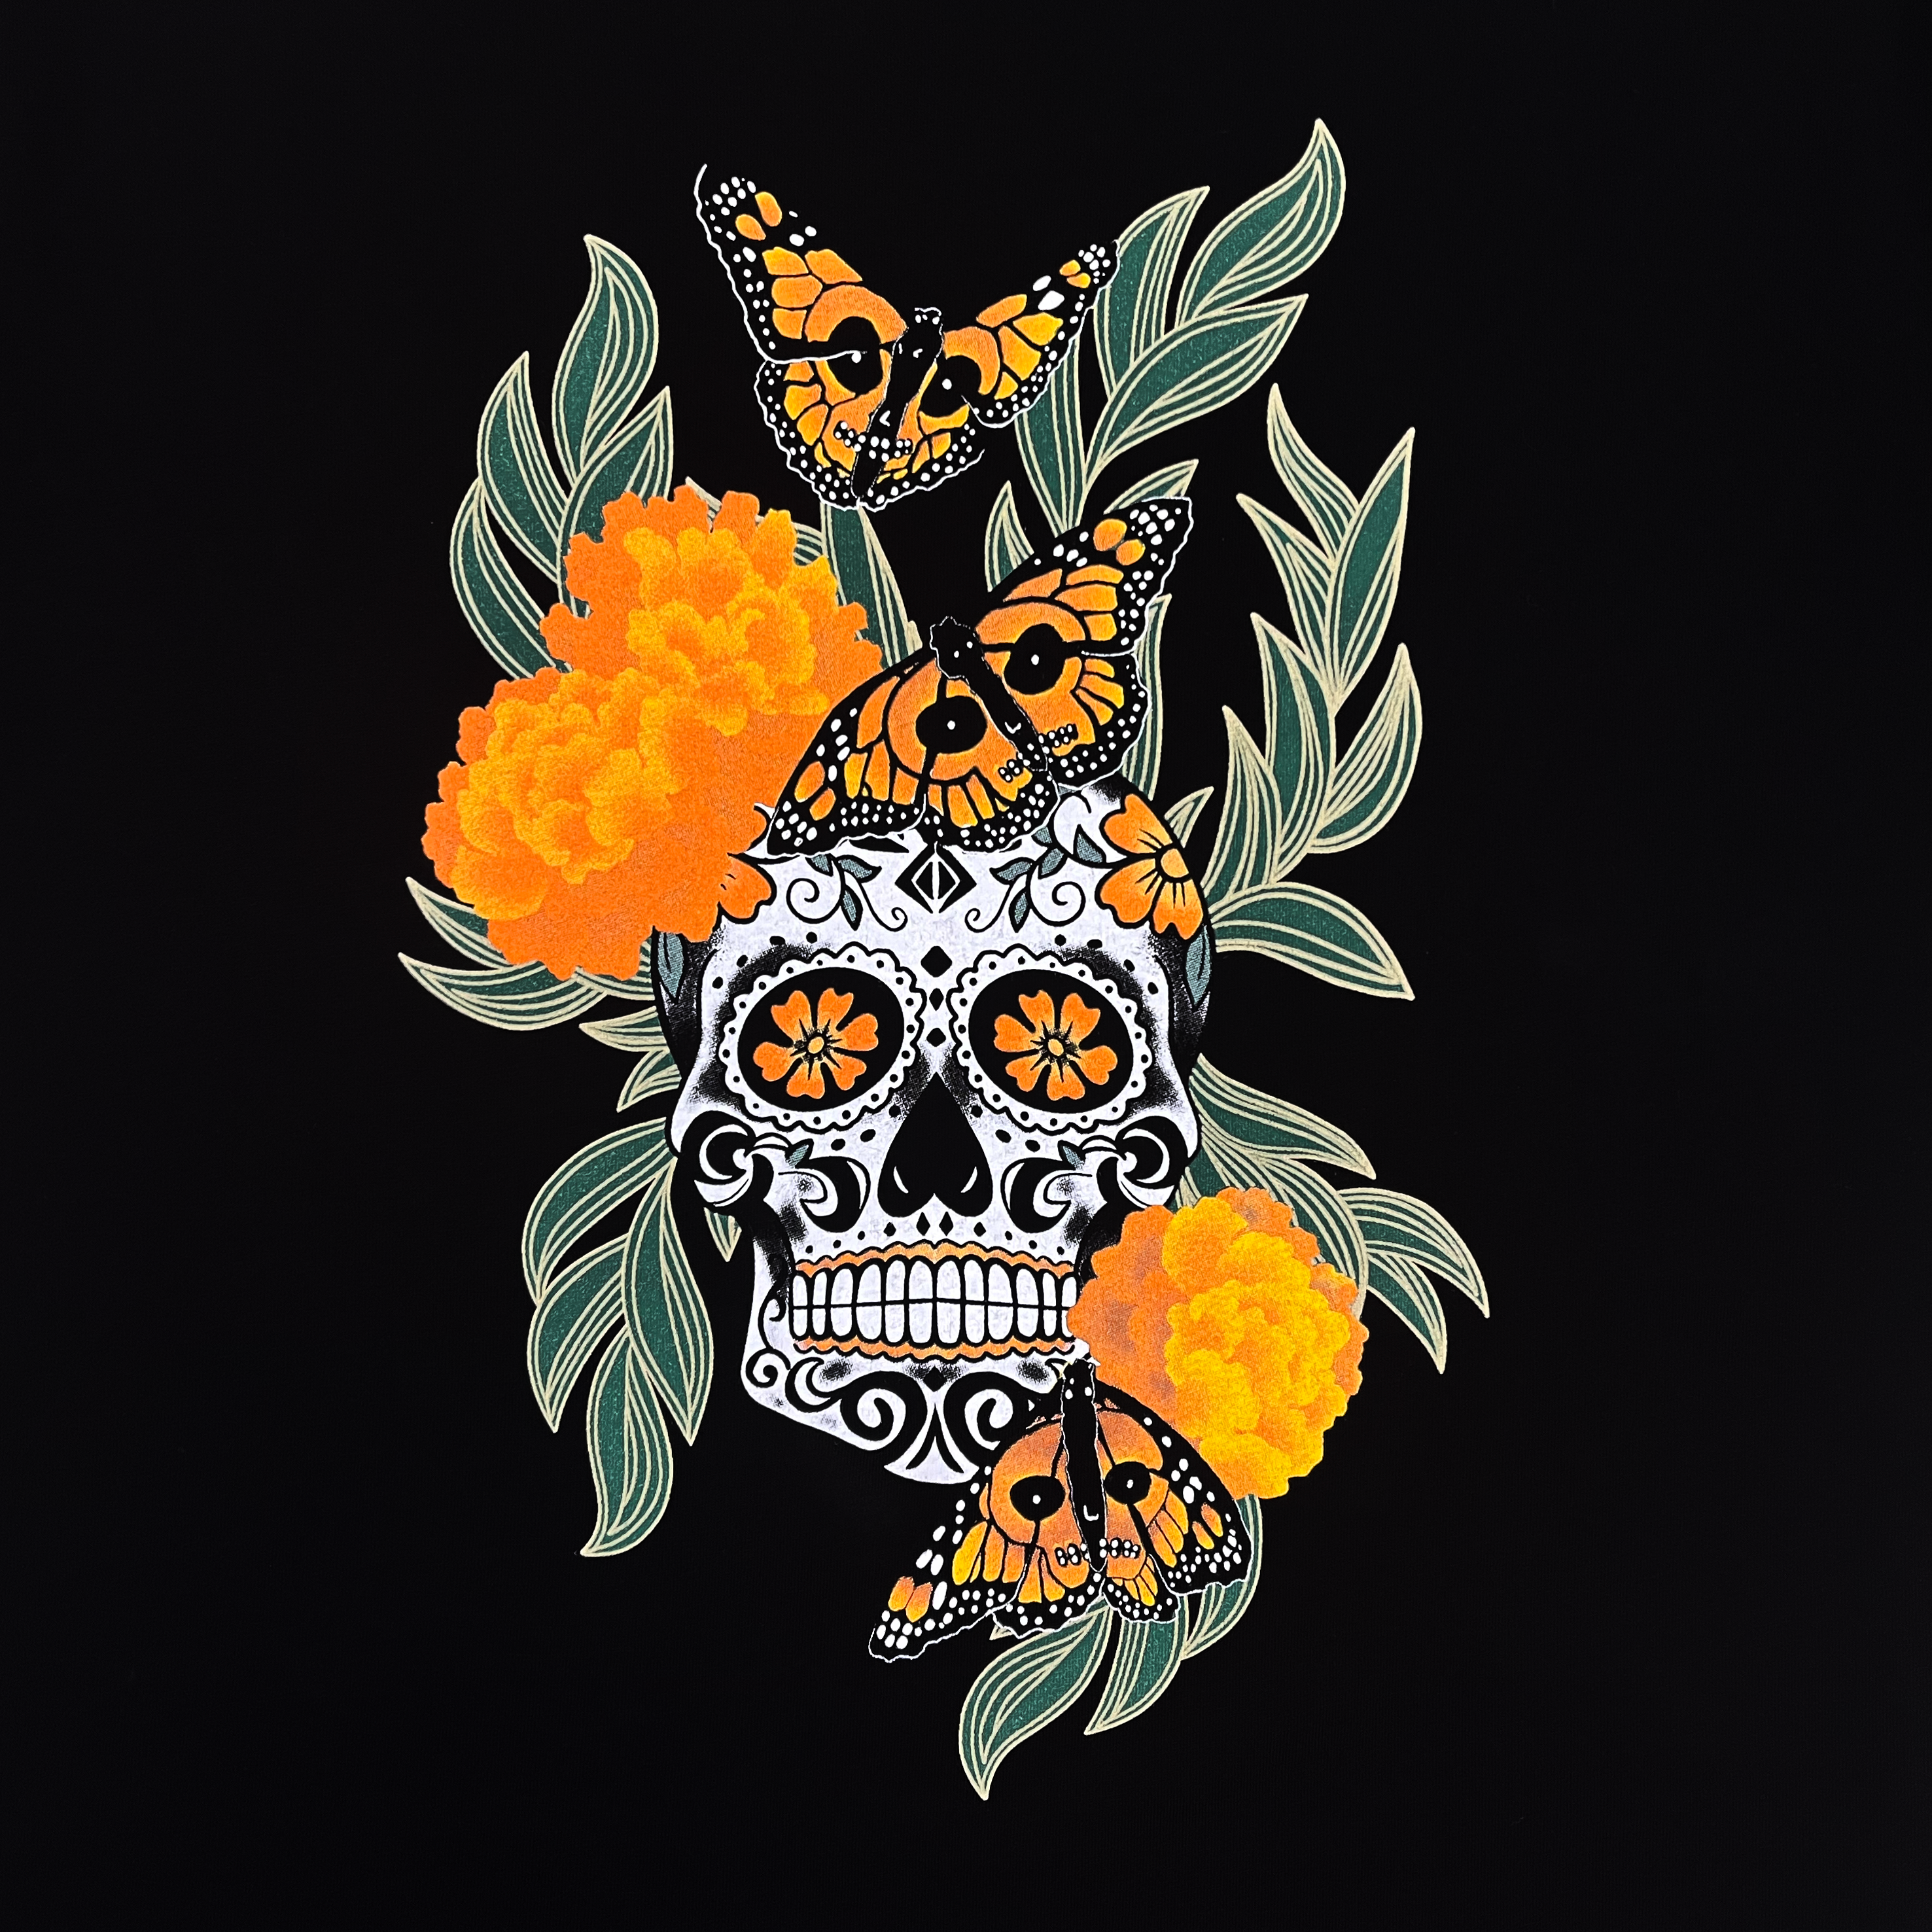 Close-up of graphic art by Oakland artist Jet Martinez depicting a sugar skull surrounded by Marigolds and Monarch butterflies on a black t-shirt.